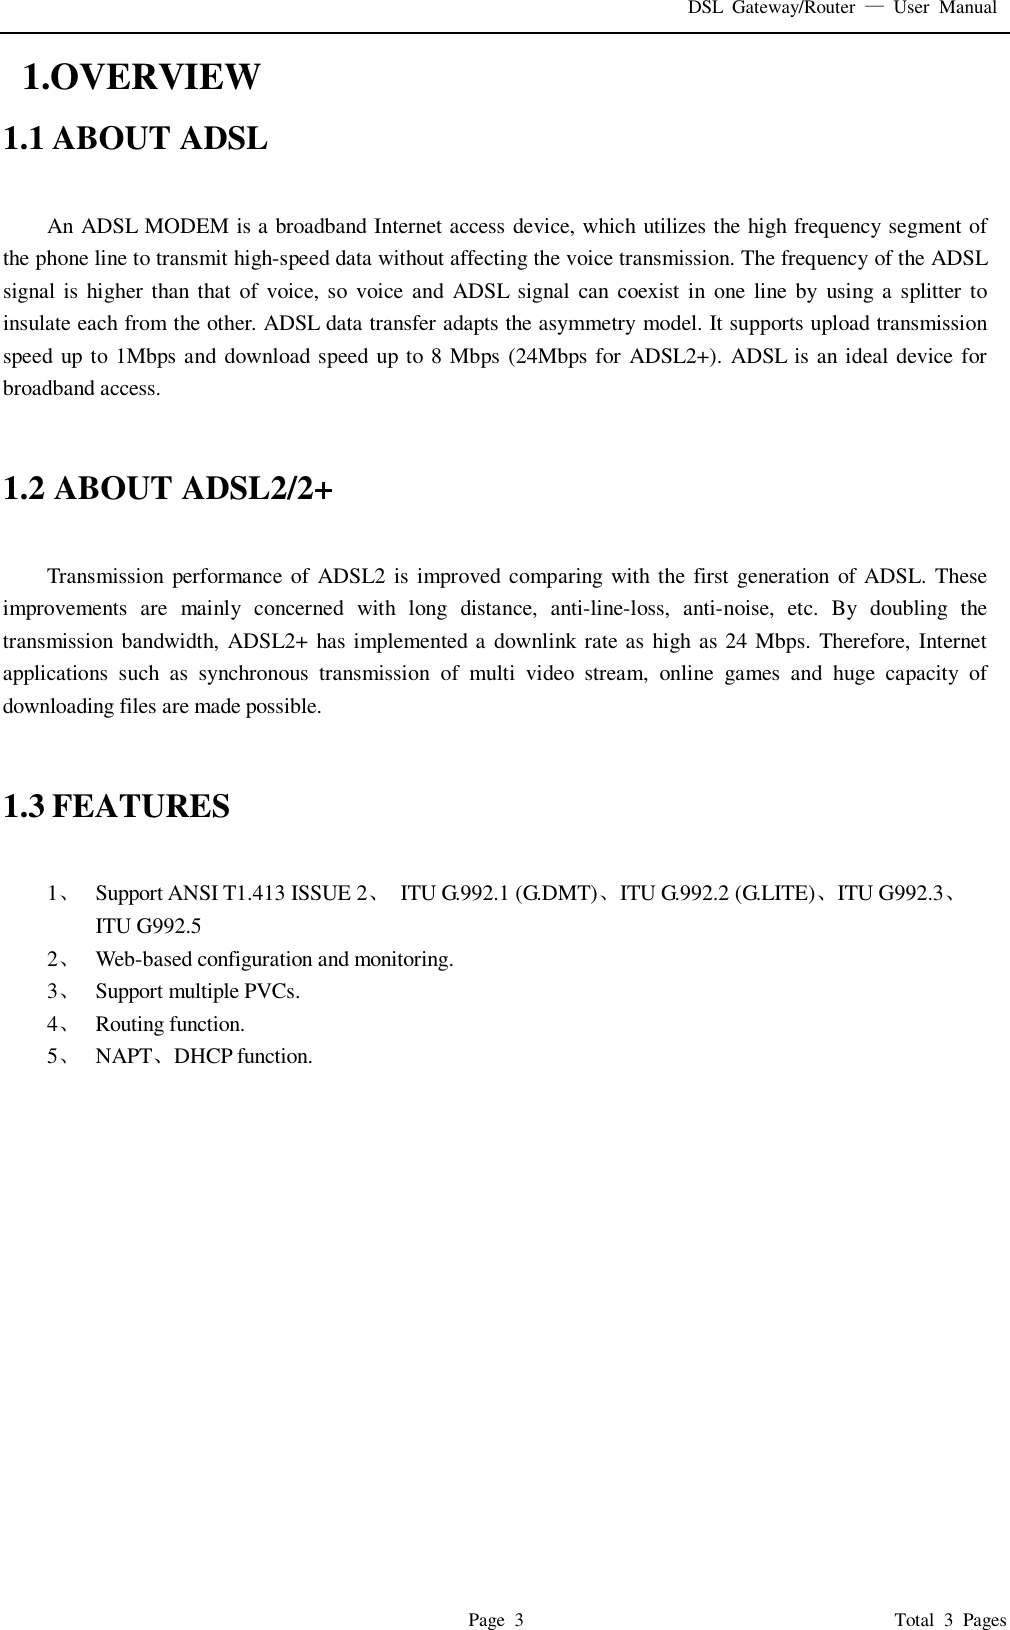 DSL Gateway/Router  — User Manual  Page 3                                       Total 3 Pages  1.OVERVIEW 1.1 ABOUT ADSL  An ADSL MODEM is a broadband Internet access device, which utilizes the high frequency segment of the phone line to transmit high-speed data without affecting the voice transmission. The frequency of the ADSL signal is higher than that of voice, so voice and ADSL signal can coexist in one line by using a splitter to insulate each from the other. ADSL data transfer adapts the asymmetry model. It supports upload transmission speed up to 1Mbps and download speed up to 8 Mbps (24Mbps for ADSL2+). ADSL is an ideal device for broadband access.   1.2 ABOUT ADSL2/2+  Transmission performance of ADSL2 is improved comparing with the first generation of ADSL. These improvements are mainly concerned with long distance, anti-line-loss, anti-noise, etc. By doubling the transmission bandwidth, ADSL2+ has implemented a downlink rate as high as 24 Mbps. Therefore, Internet applications such as synchronous transmission of multi video stream, online games and huge capacity of downloading files are made possible.   1.3 FEATURES  1、  Support ANSI T1.413 ISSUE 2、 ITU G.992.1 (G.DMT)、ITU G.992.2 (G.LITE)、ITU G992.3、  ITU G992.5 2、  Web-based configuration and monitoring. 3、  Support multiple PVCs. 4、  Routing function. 5、  NAPT、DHCP function.               